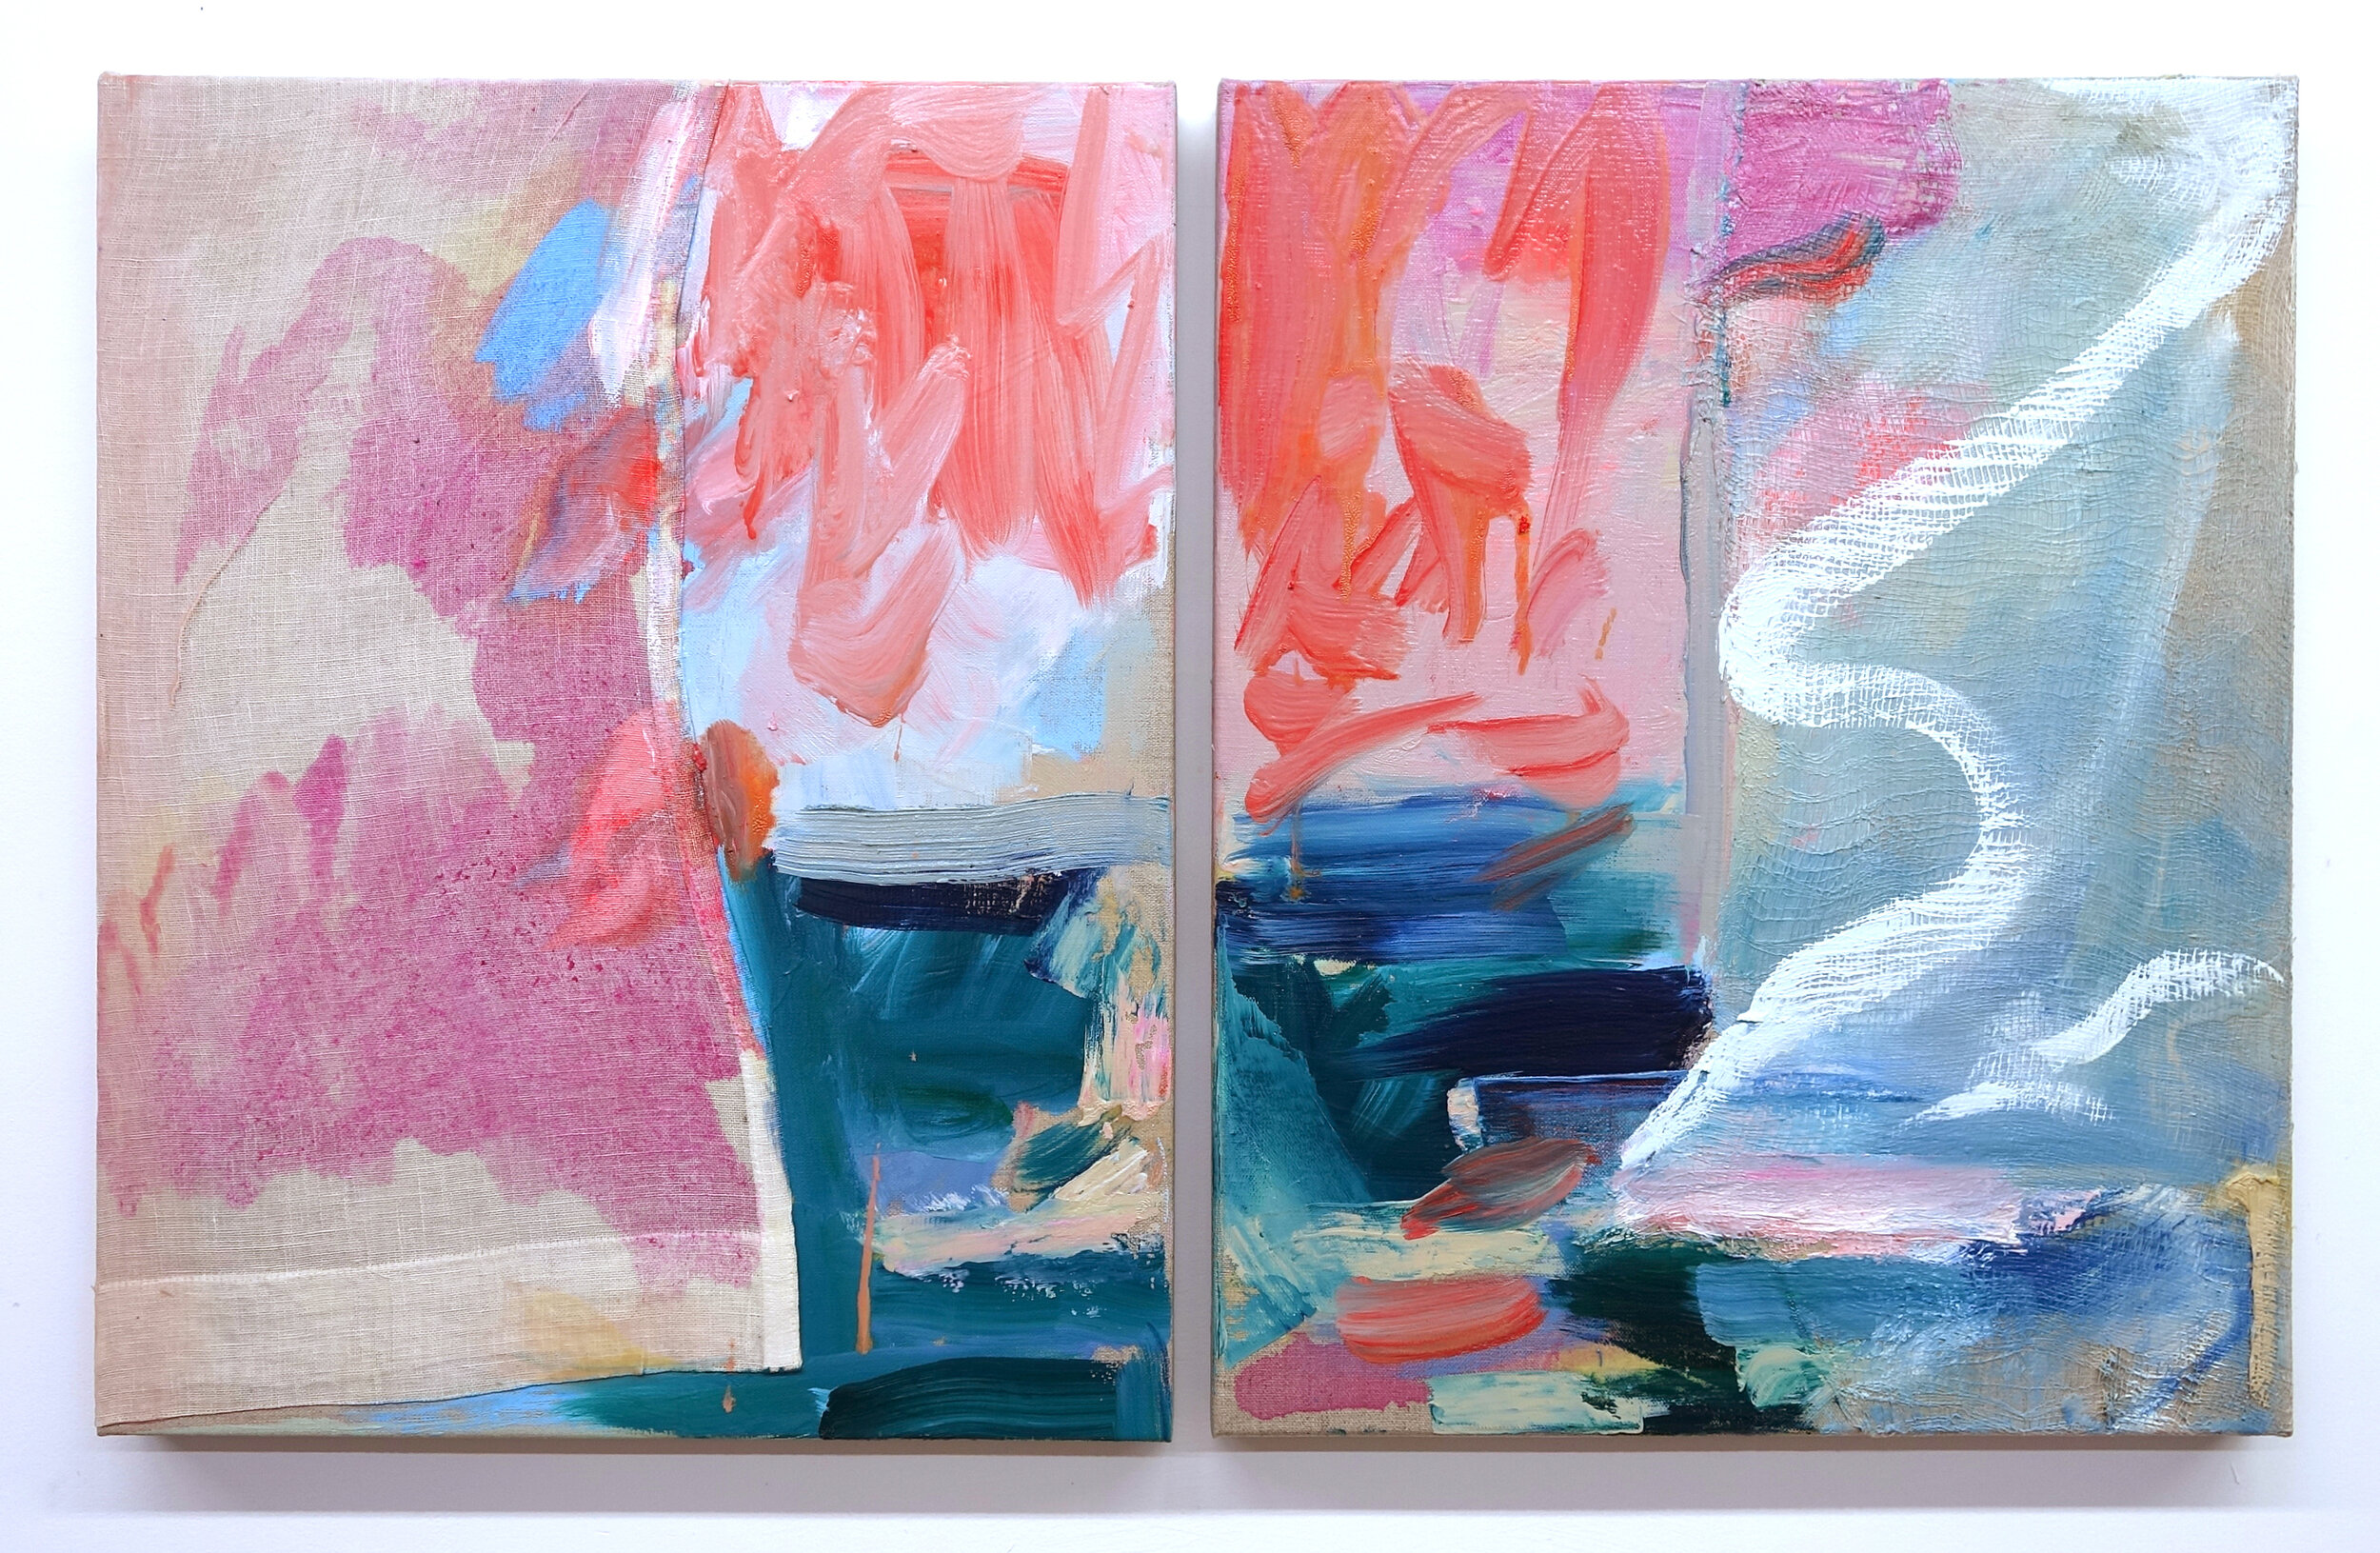    Since Feeling Is First   (diptych)                                                                              20 x 32”                                                                                                                            oil